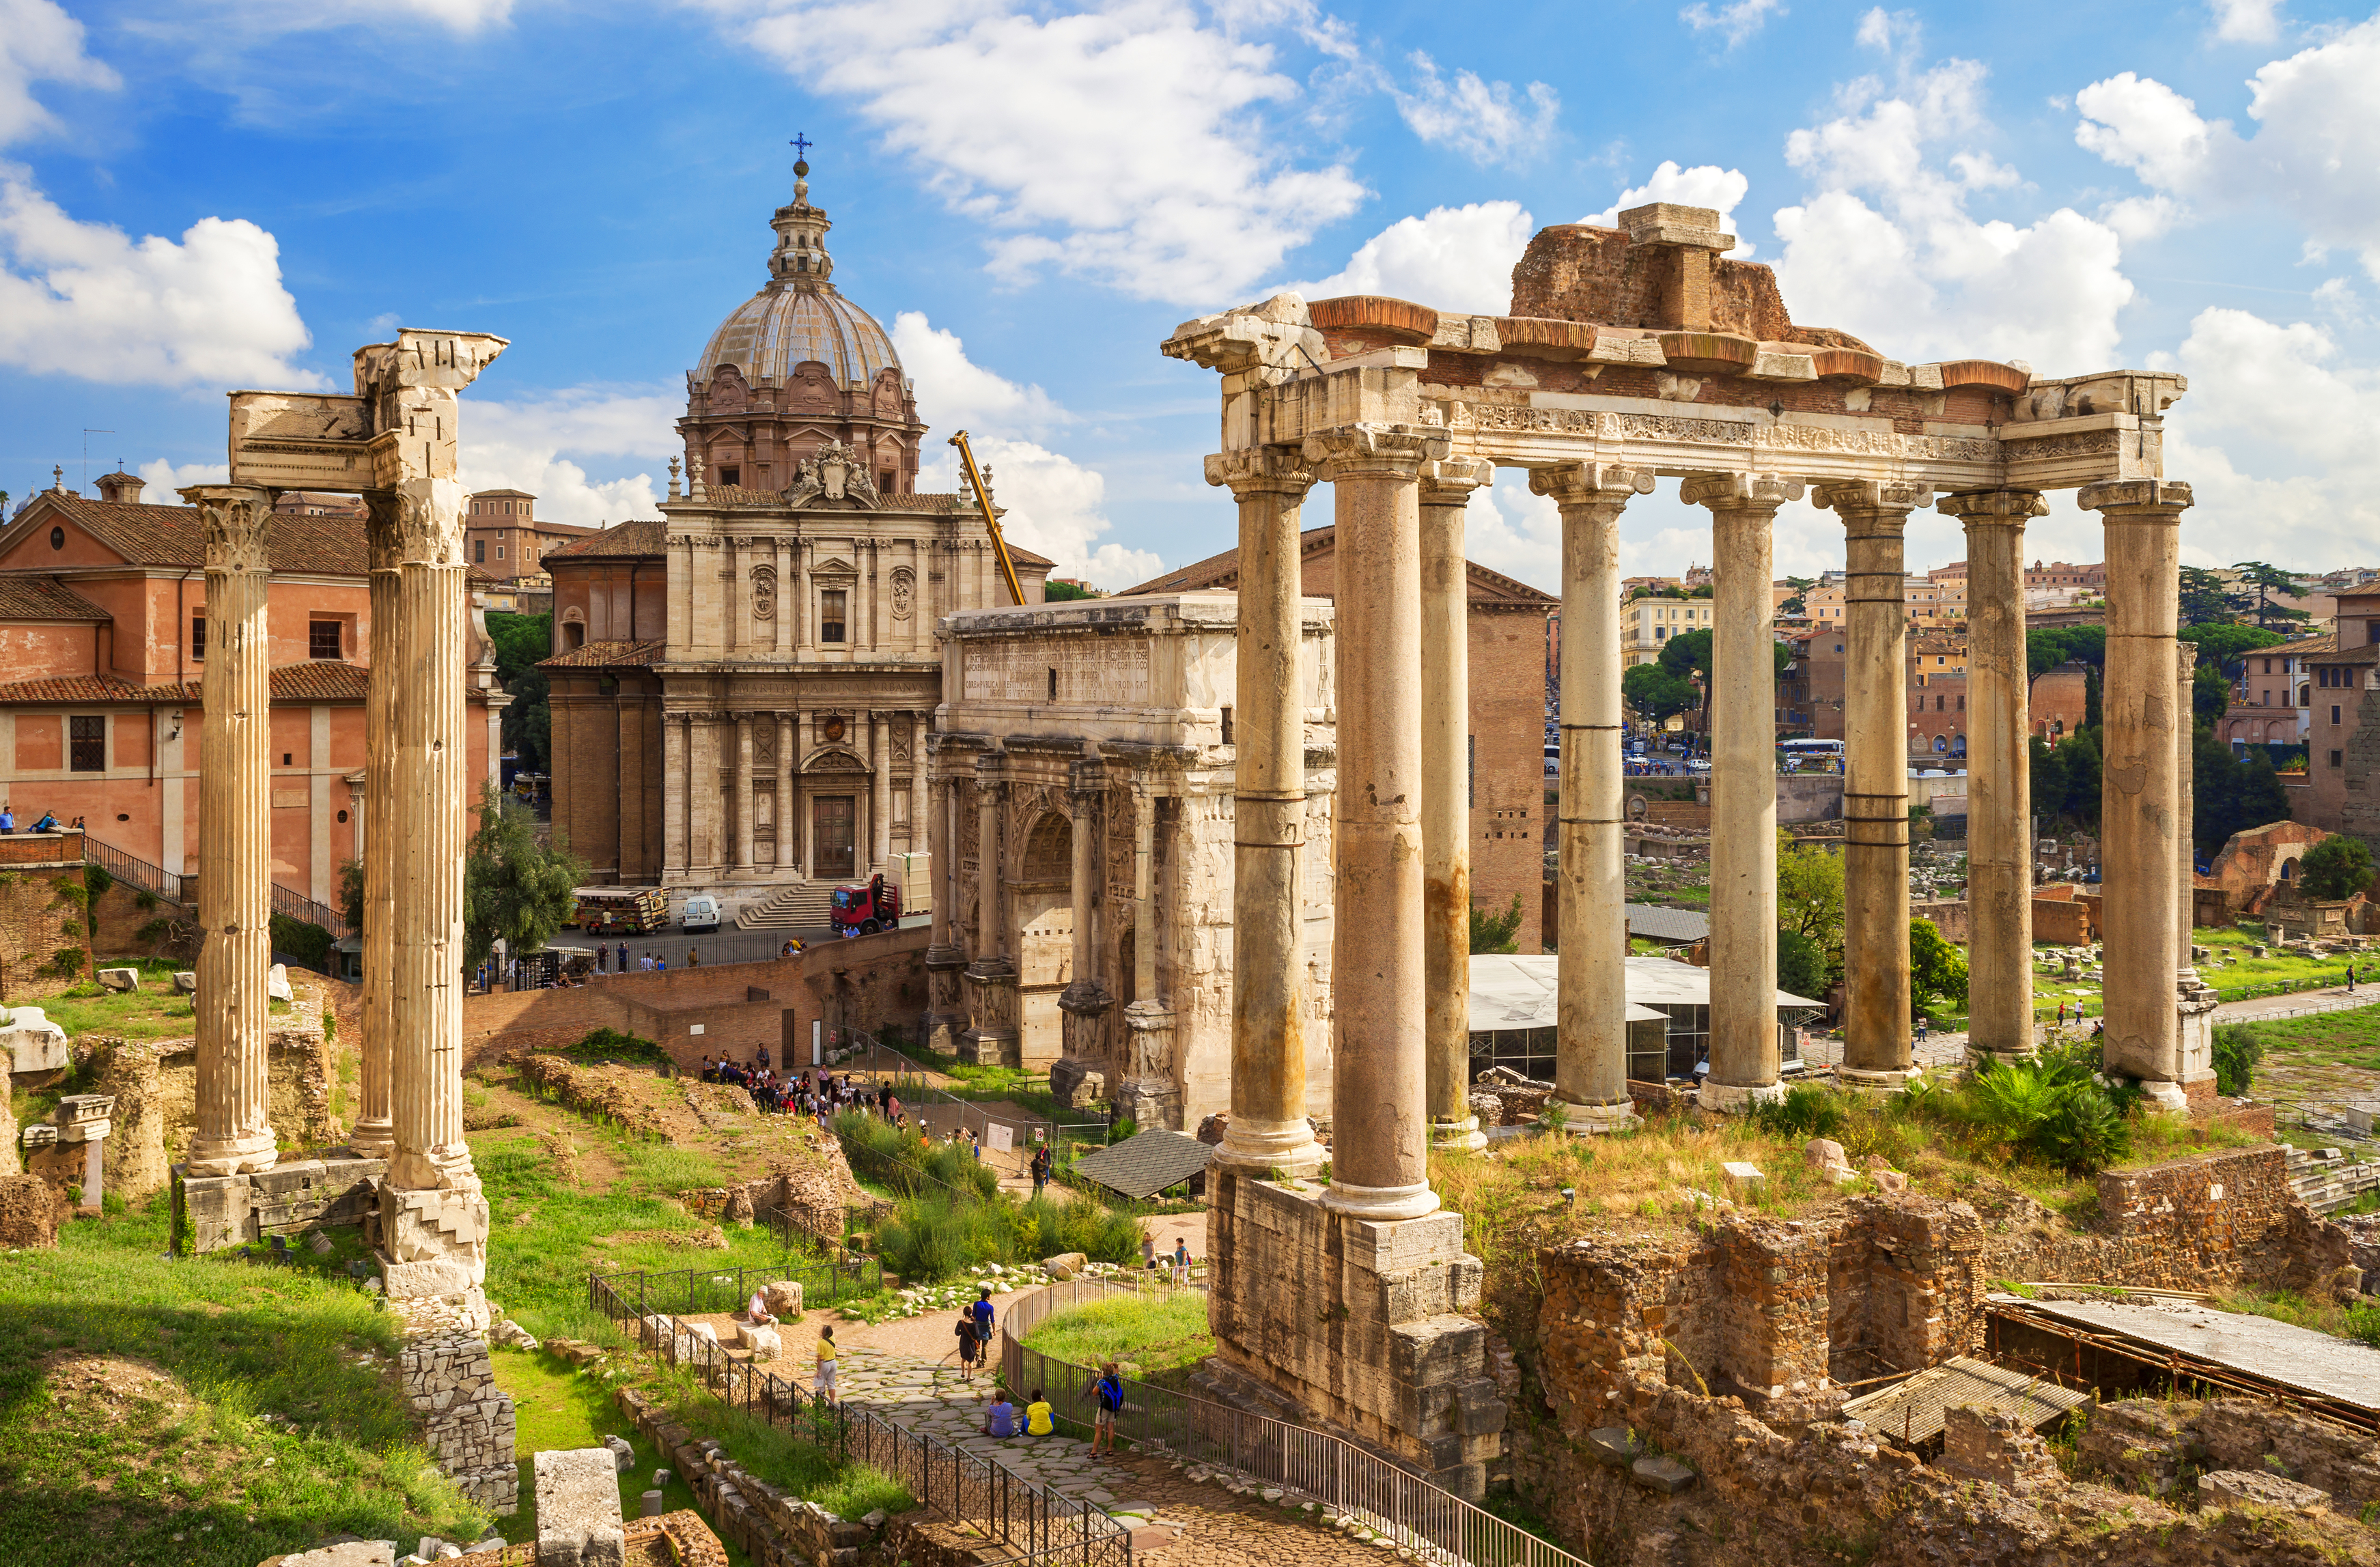 Round-trip flights to Rome in the $300s and $400s